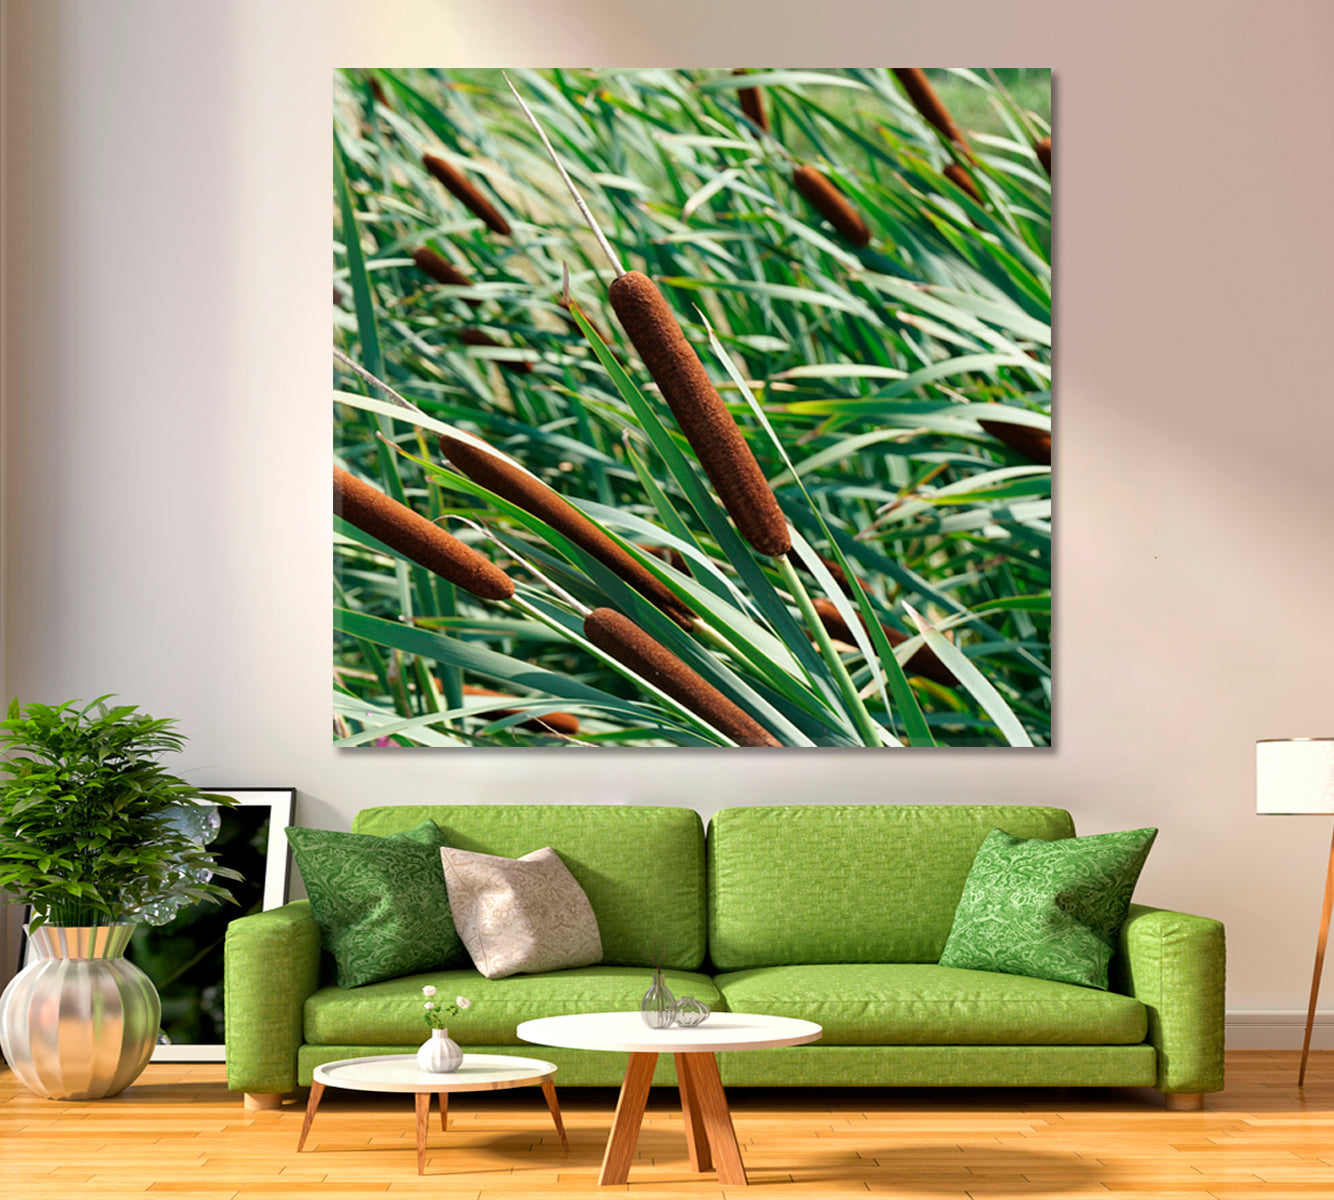 Colorful Green Reeds with Cattail - Square Panel Floral & Botanical Split Art Artesty   